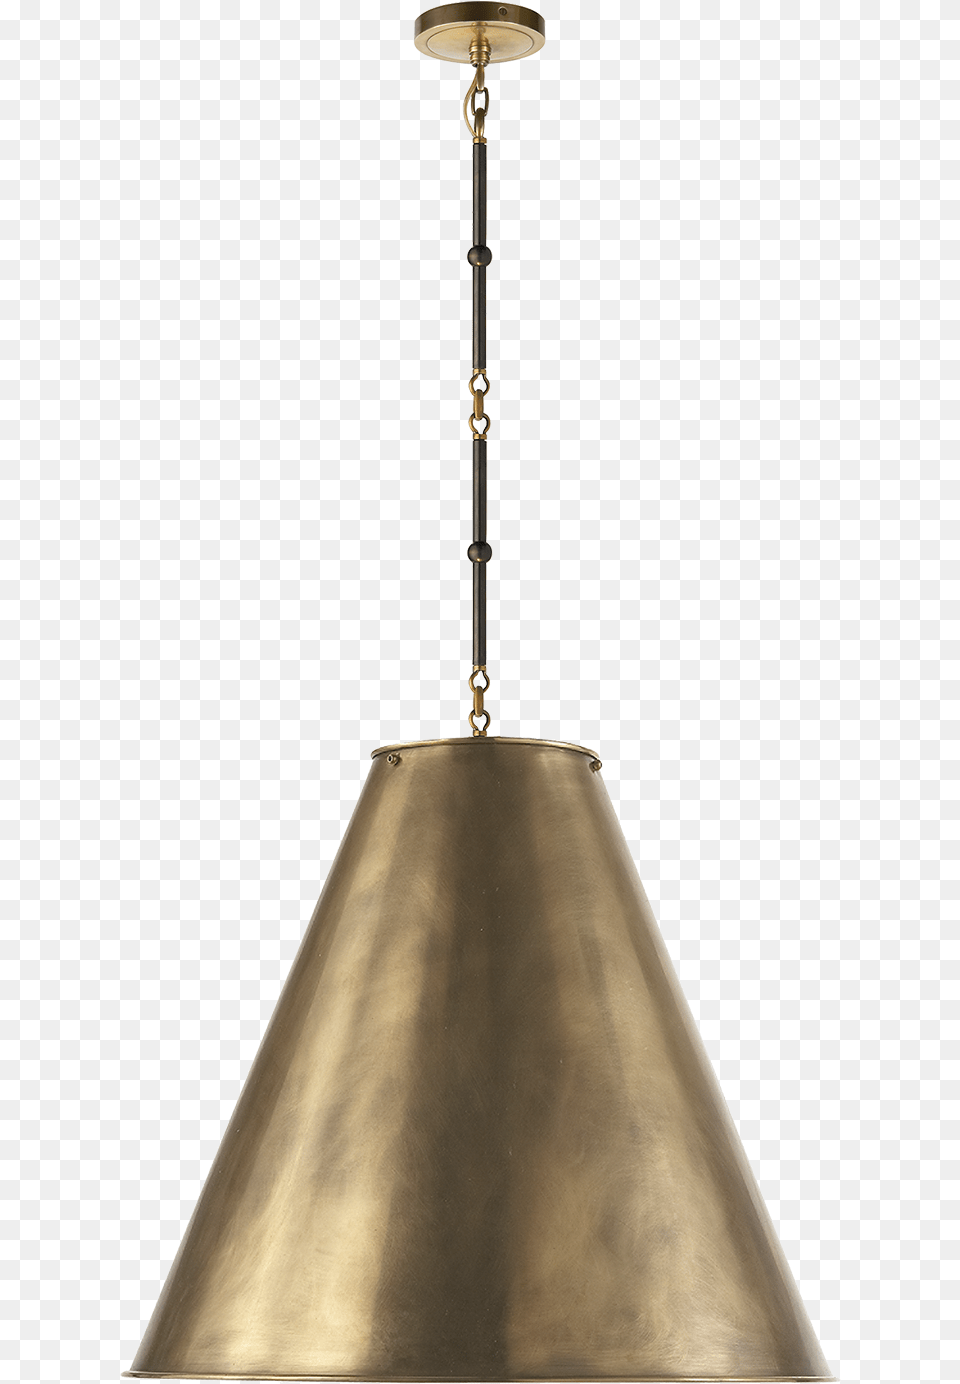 Gold Cone Pendant Light, Lamp, Lighting, Lampshade, Chandelier Png